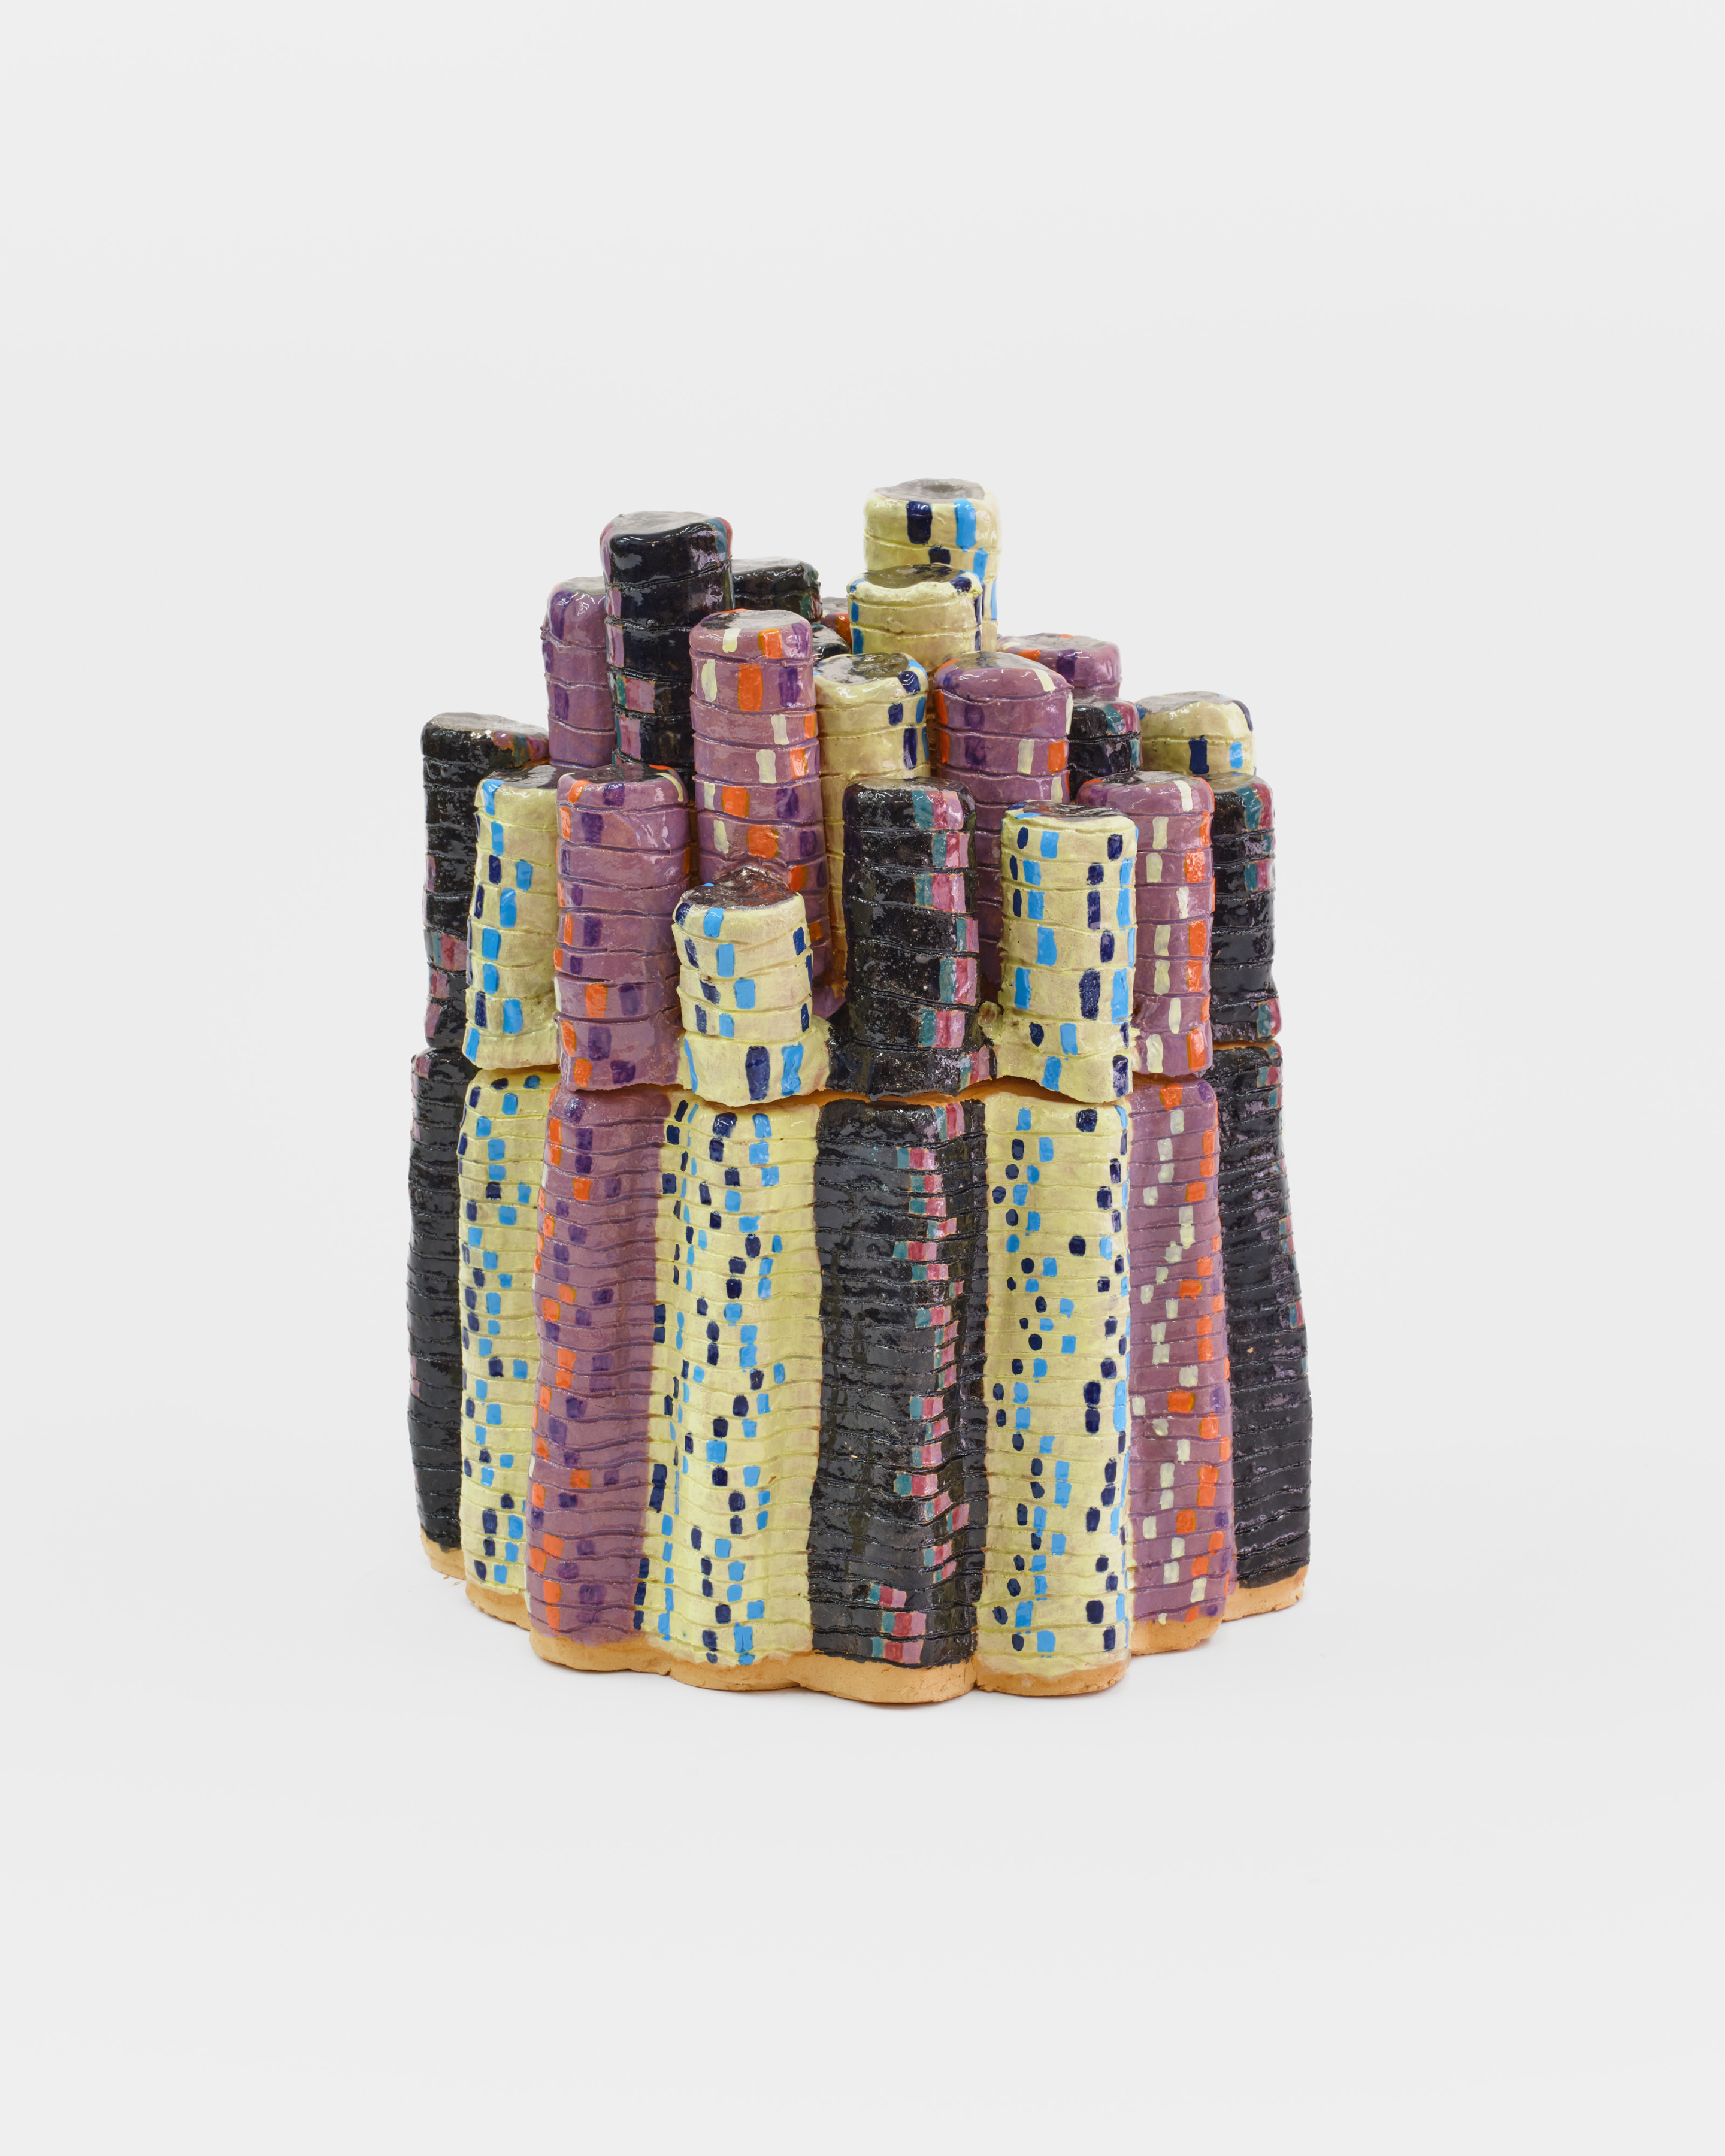 A ceramic sculpture of multicolored towers of poker chips. 